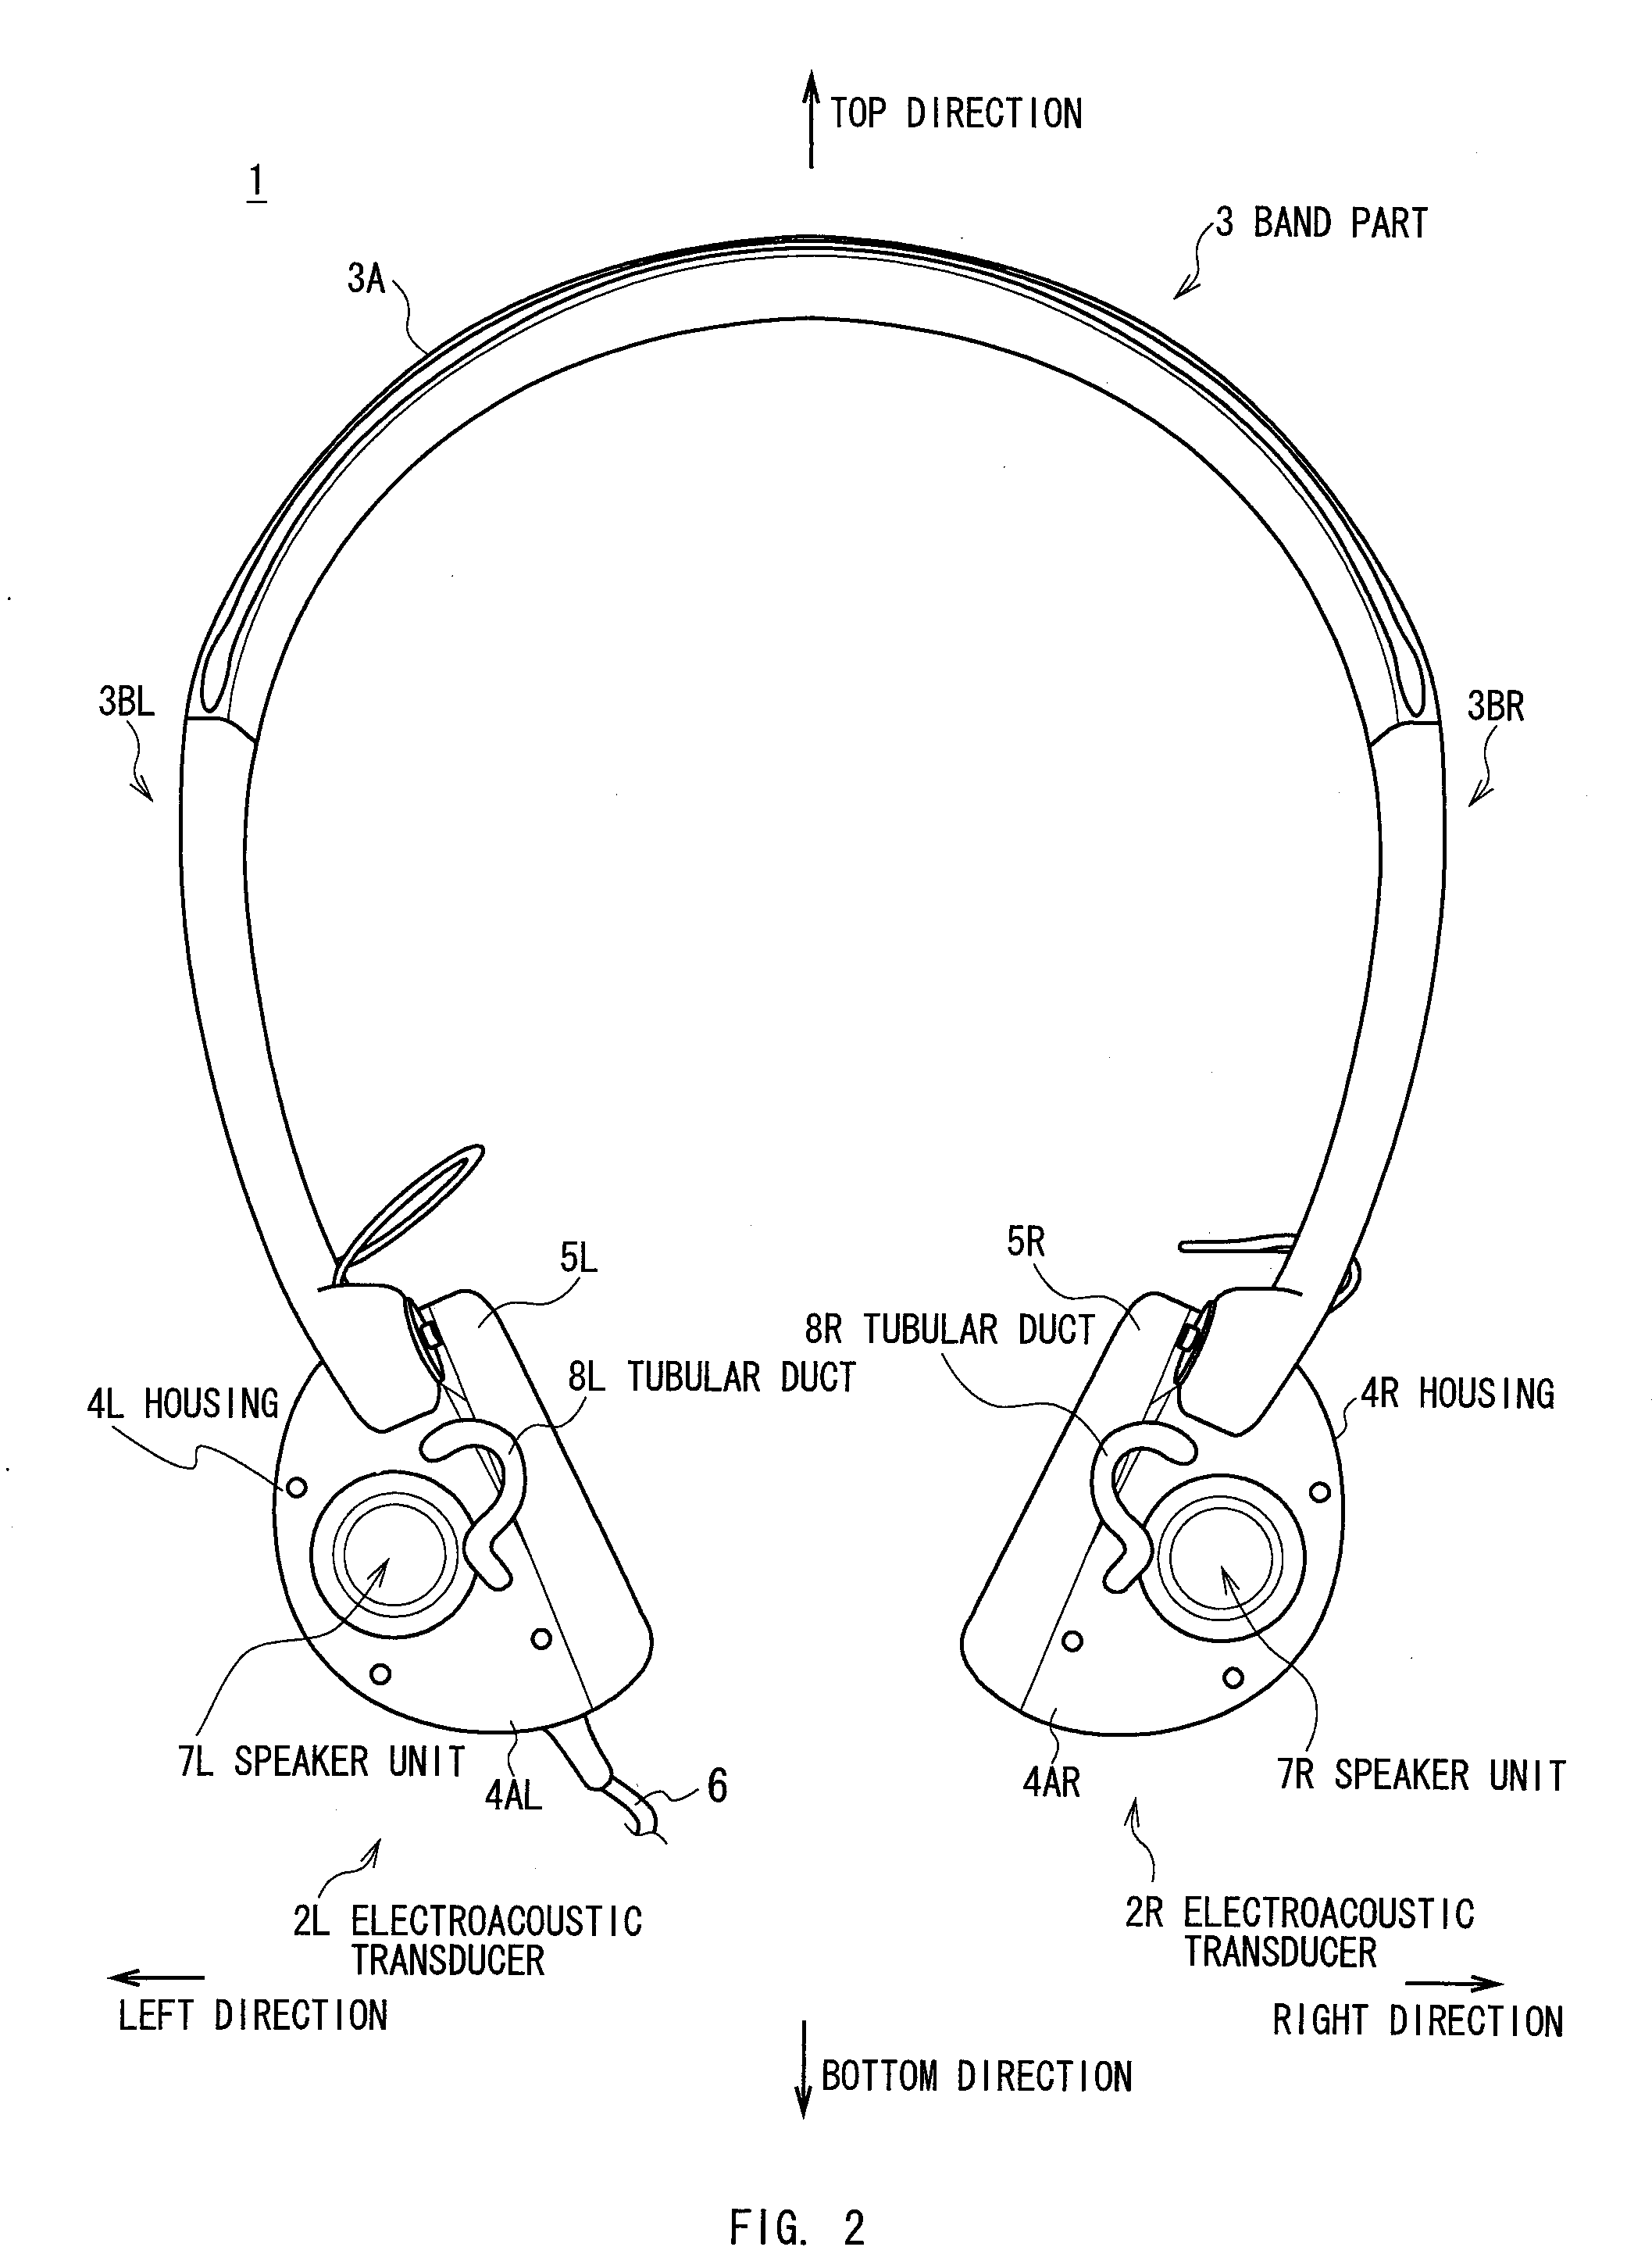 Electroacoustic Transducer and Ear Speaker Device